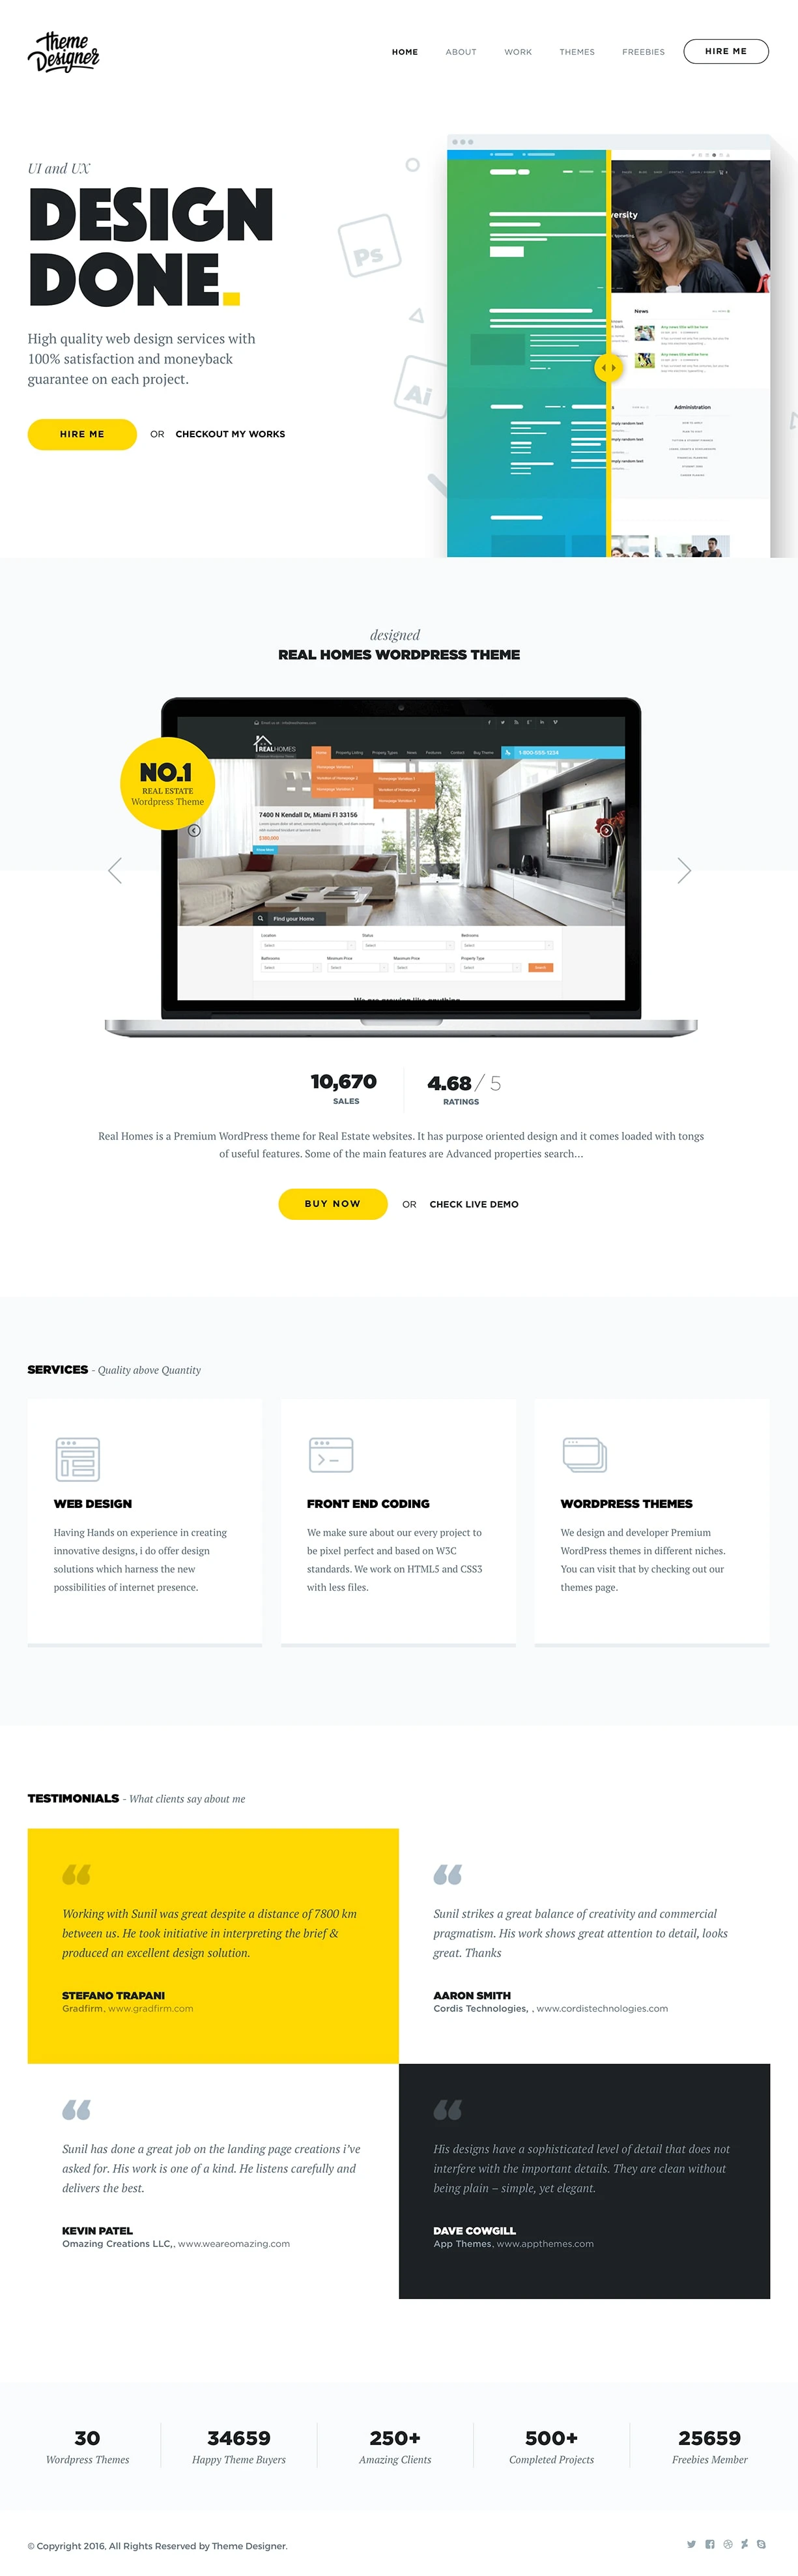 Theme Designer Landing Page Example: Having hands on experience in creating innovative designs, ThemeDesigner offer website designs, wordpress themes, landing page design and homepage design.